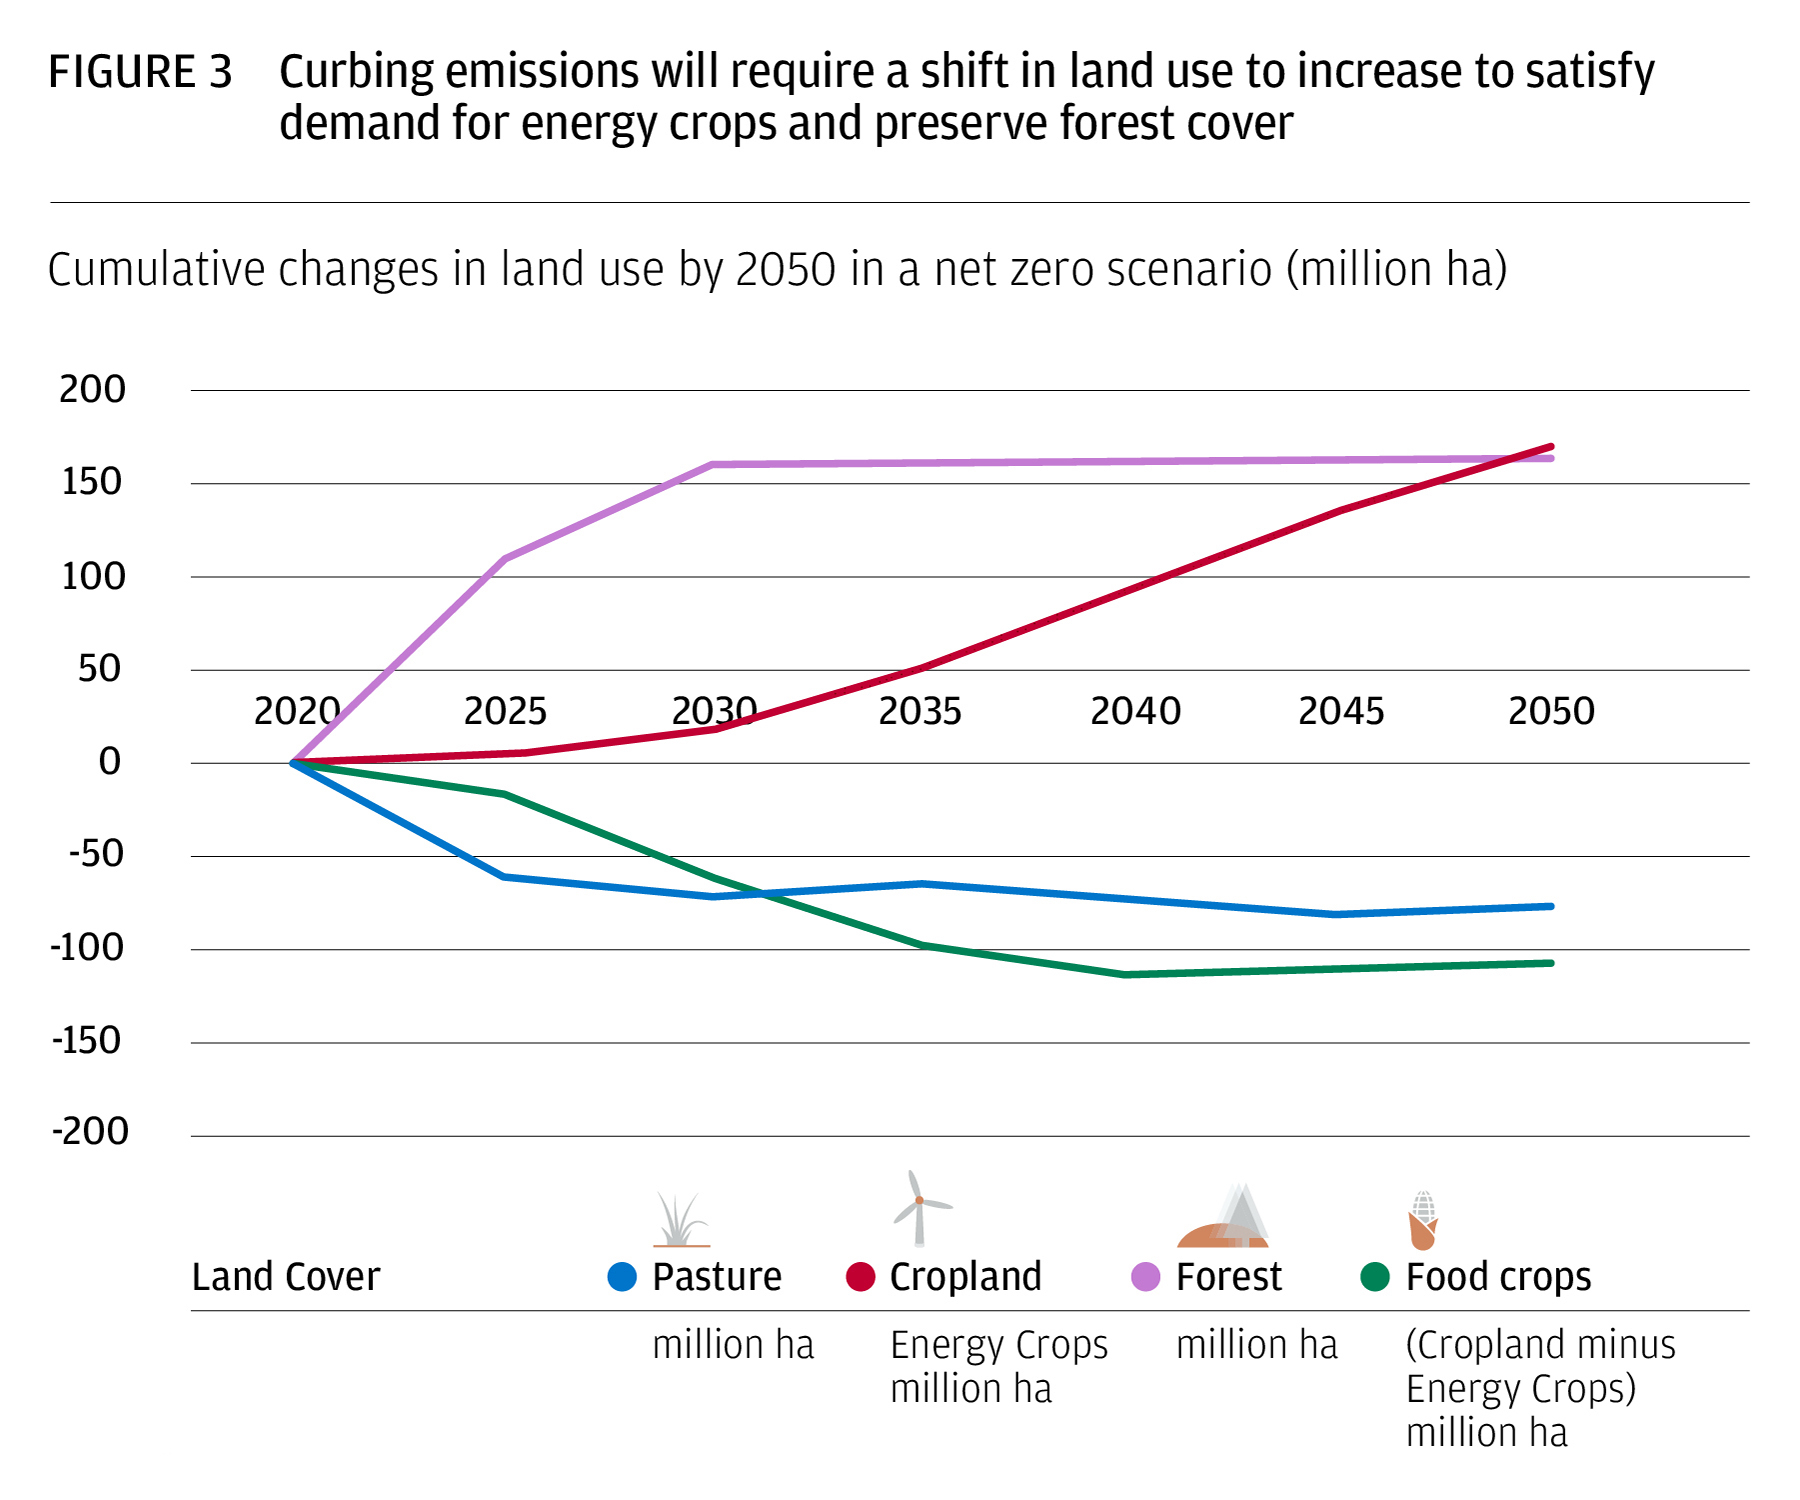 Figure 3 shows how land cover would shift in a net zero scenario by 2050.